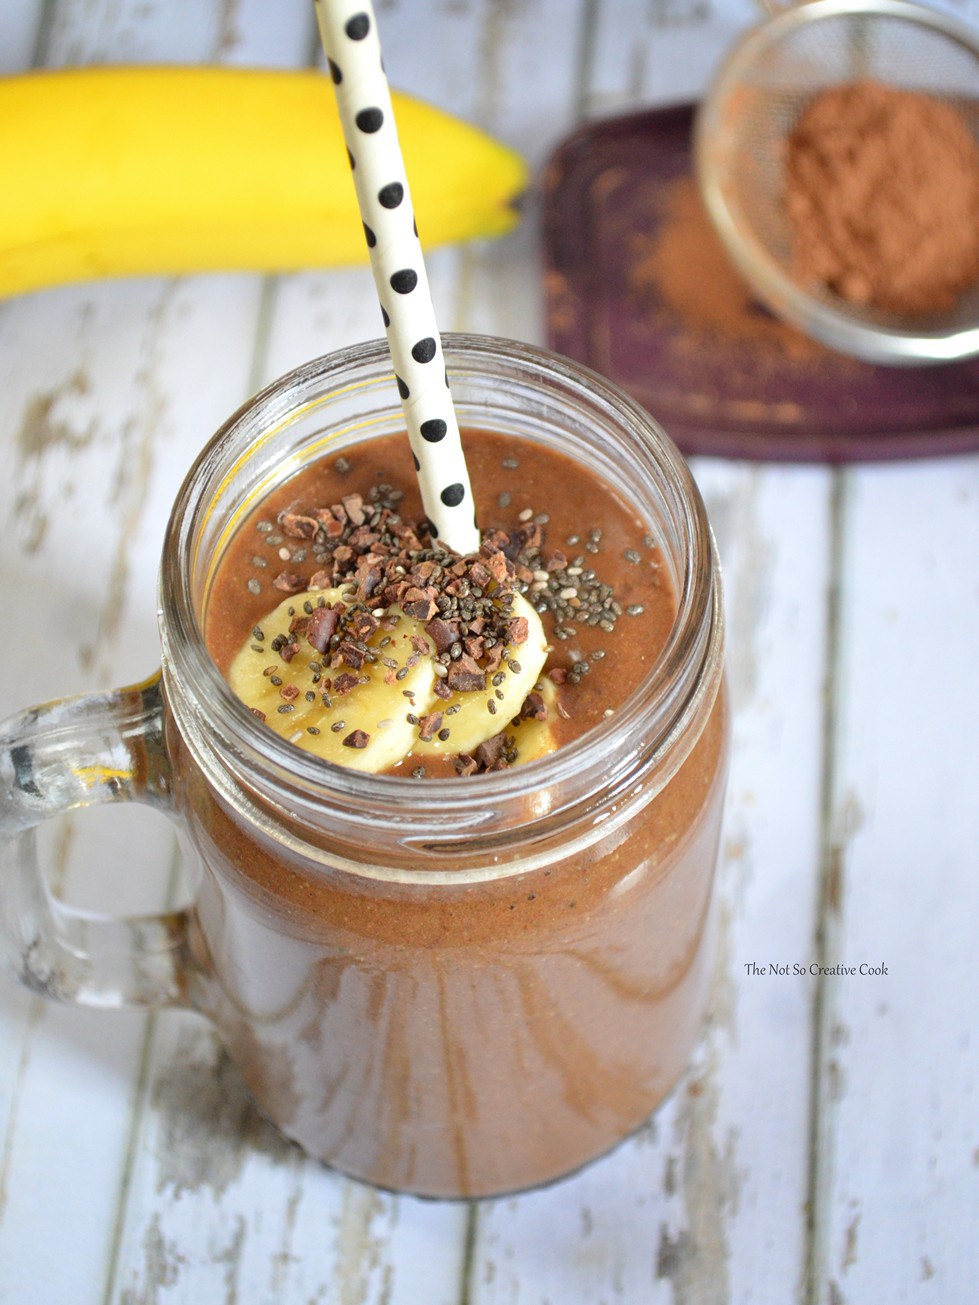 Superfood Chocolate Banana Smoothie from The Not So Creative Cook